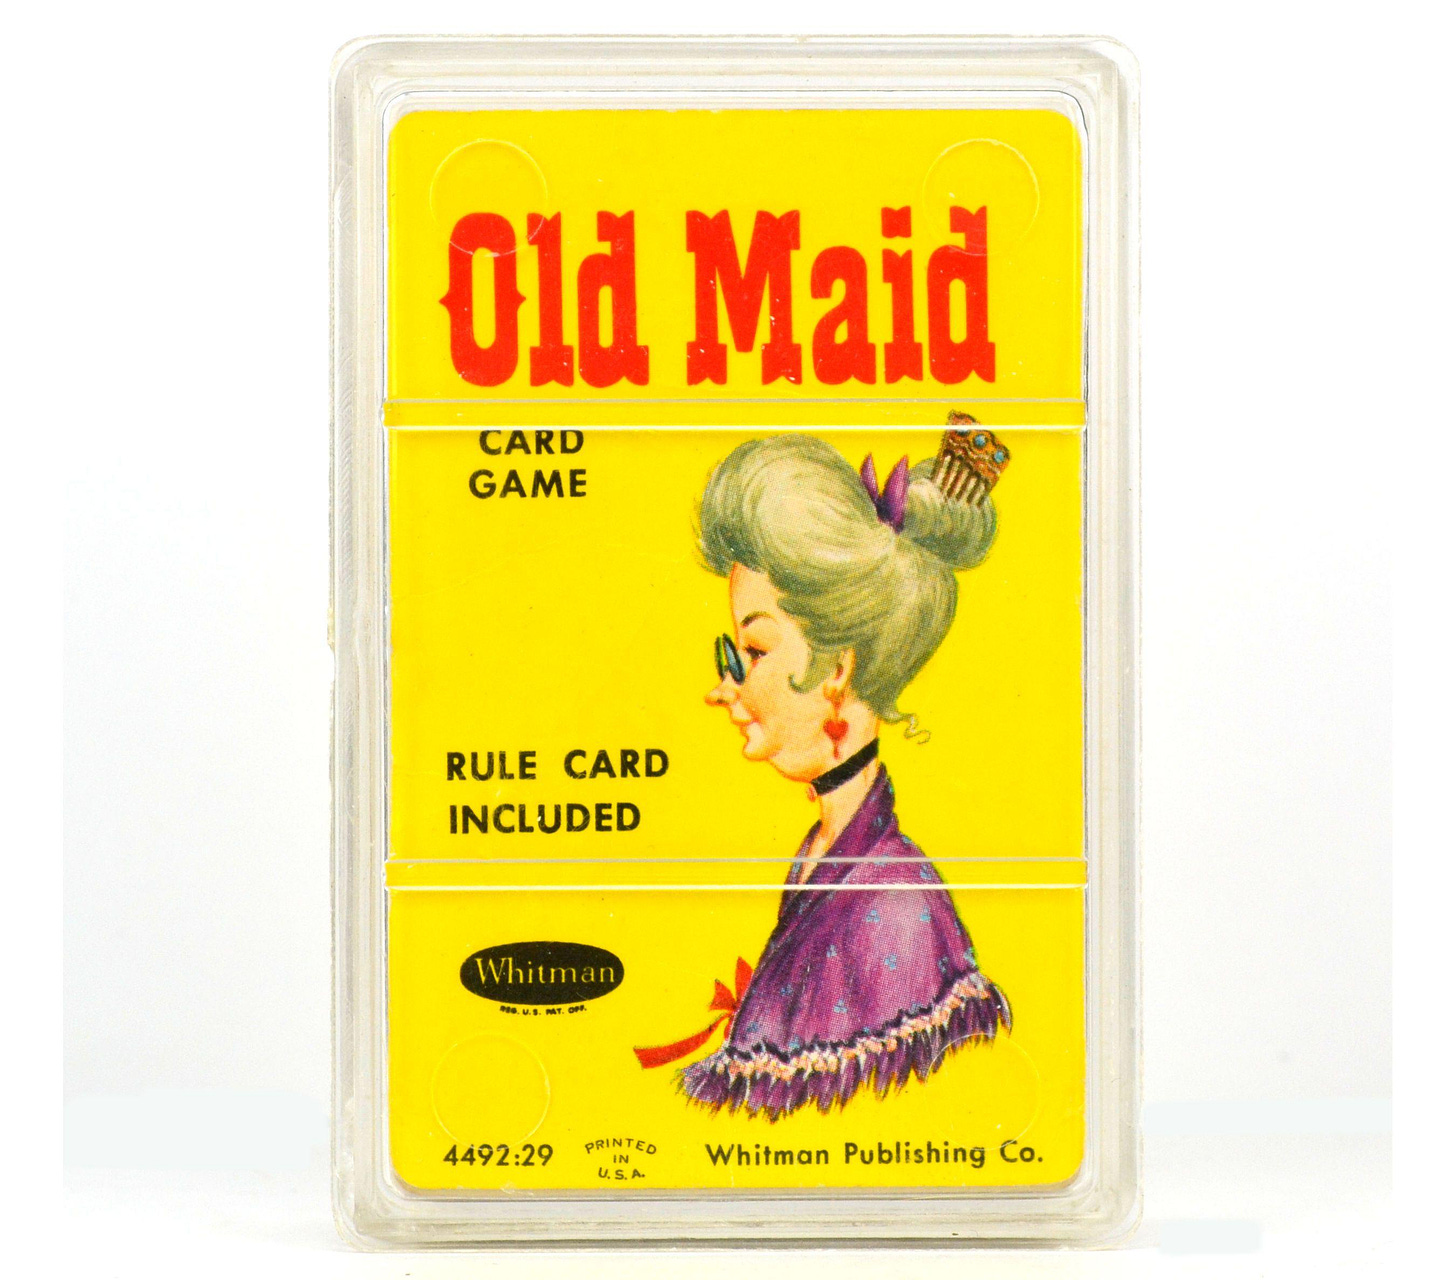 The Old Maid card game : r/nostalgia